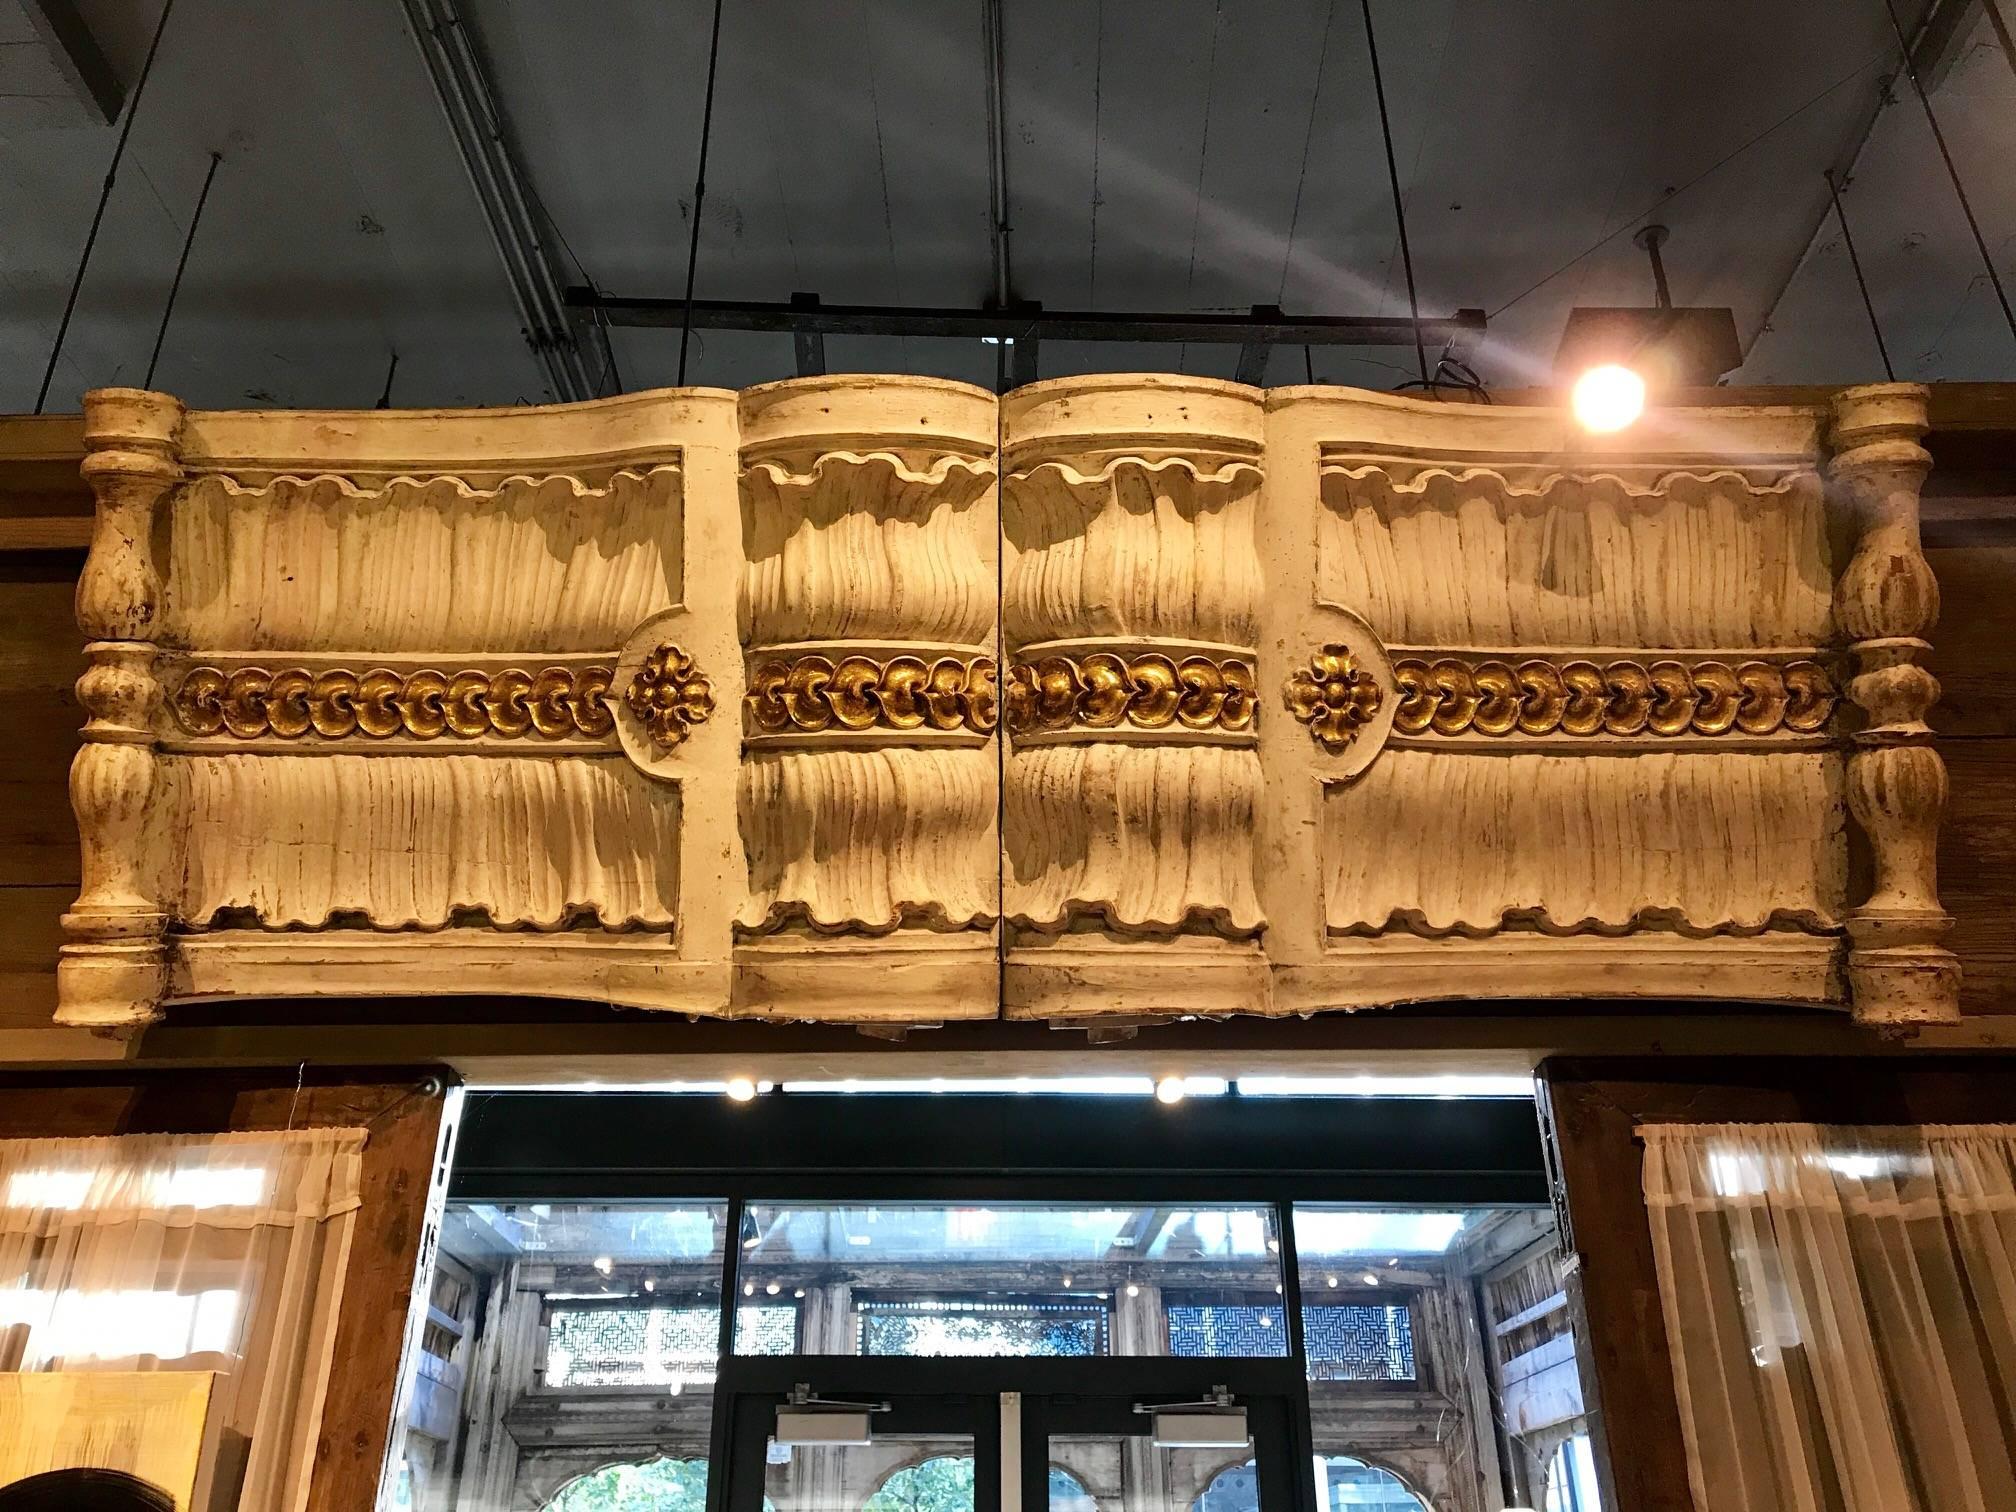 These painted architectural fragments are carved in an elegant classical style. They were salvaged from Chateau in Paris, France.